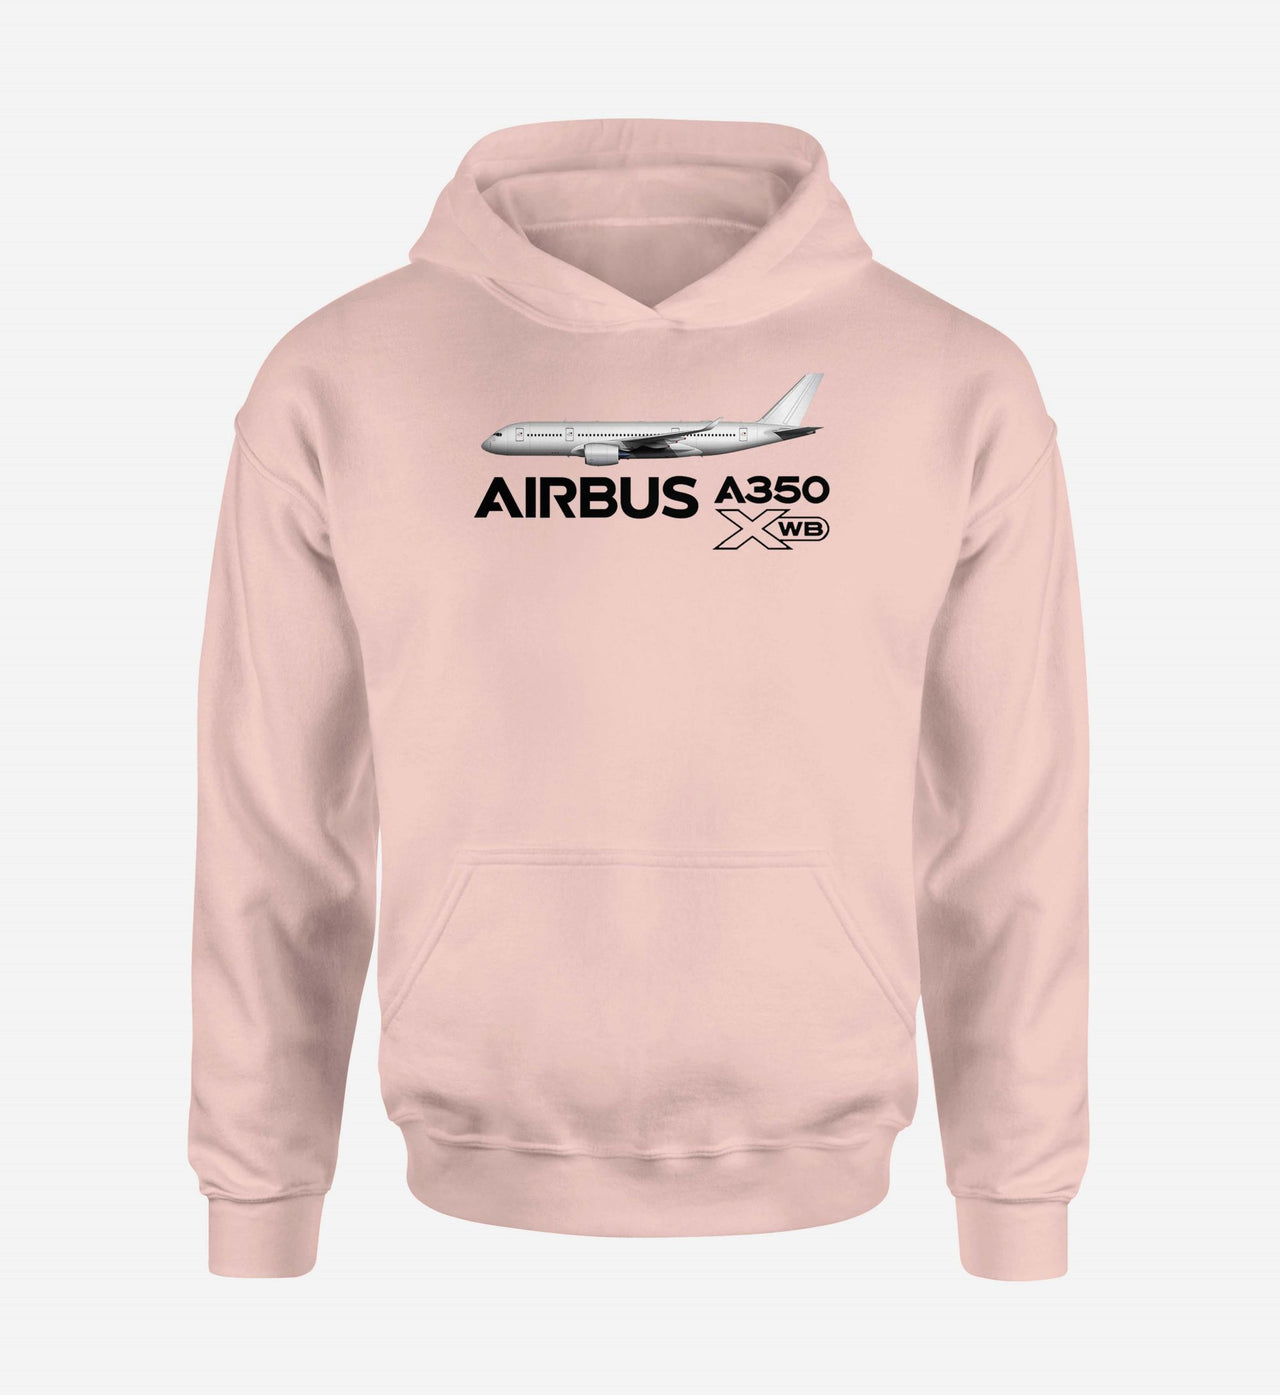 The Airbus A350 WXB Designed Hoodies